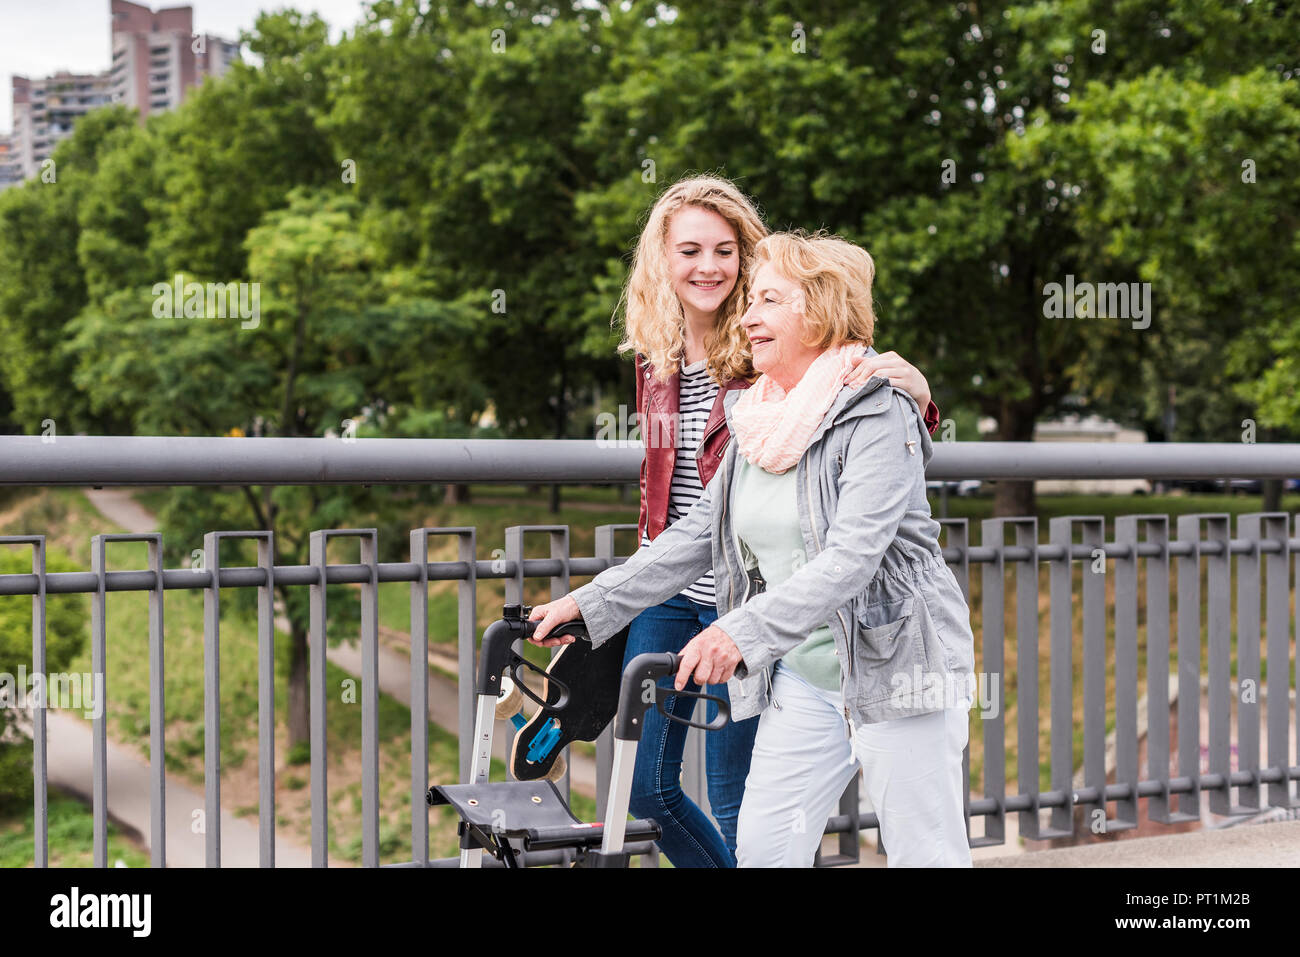 Grandmother and granddaughter strolling together Stock Photo